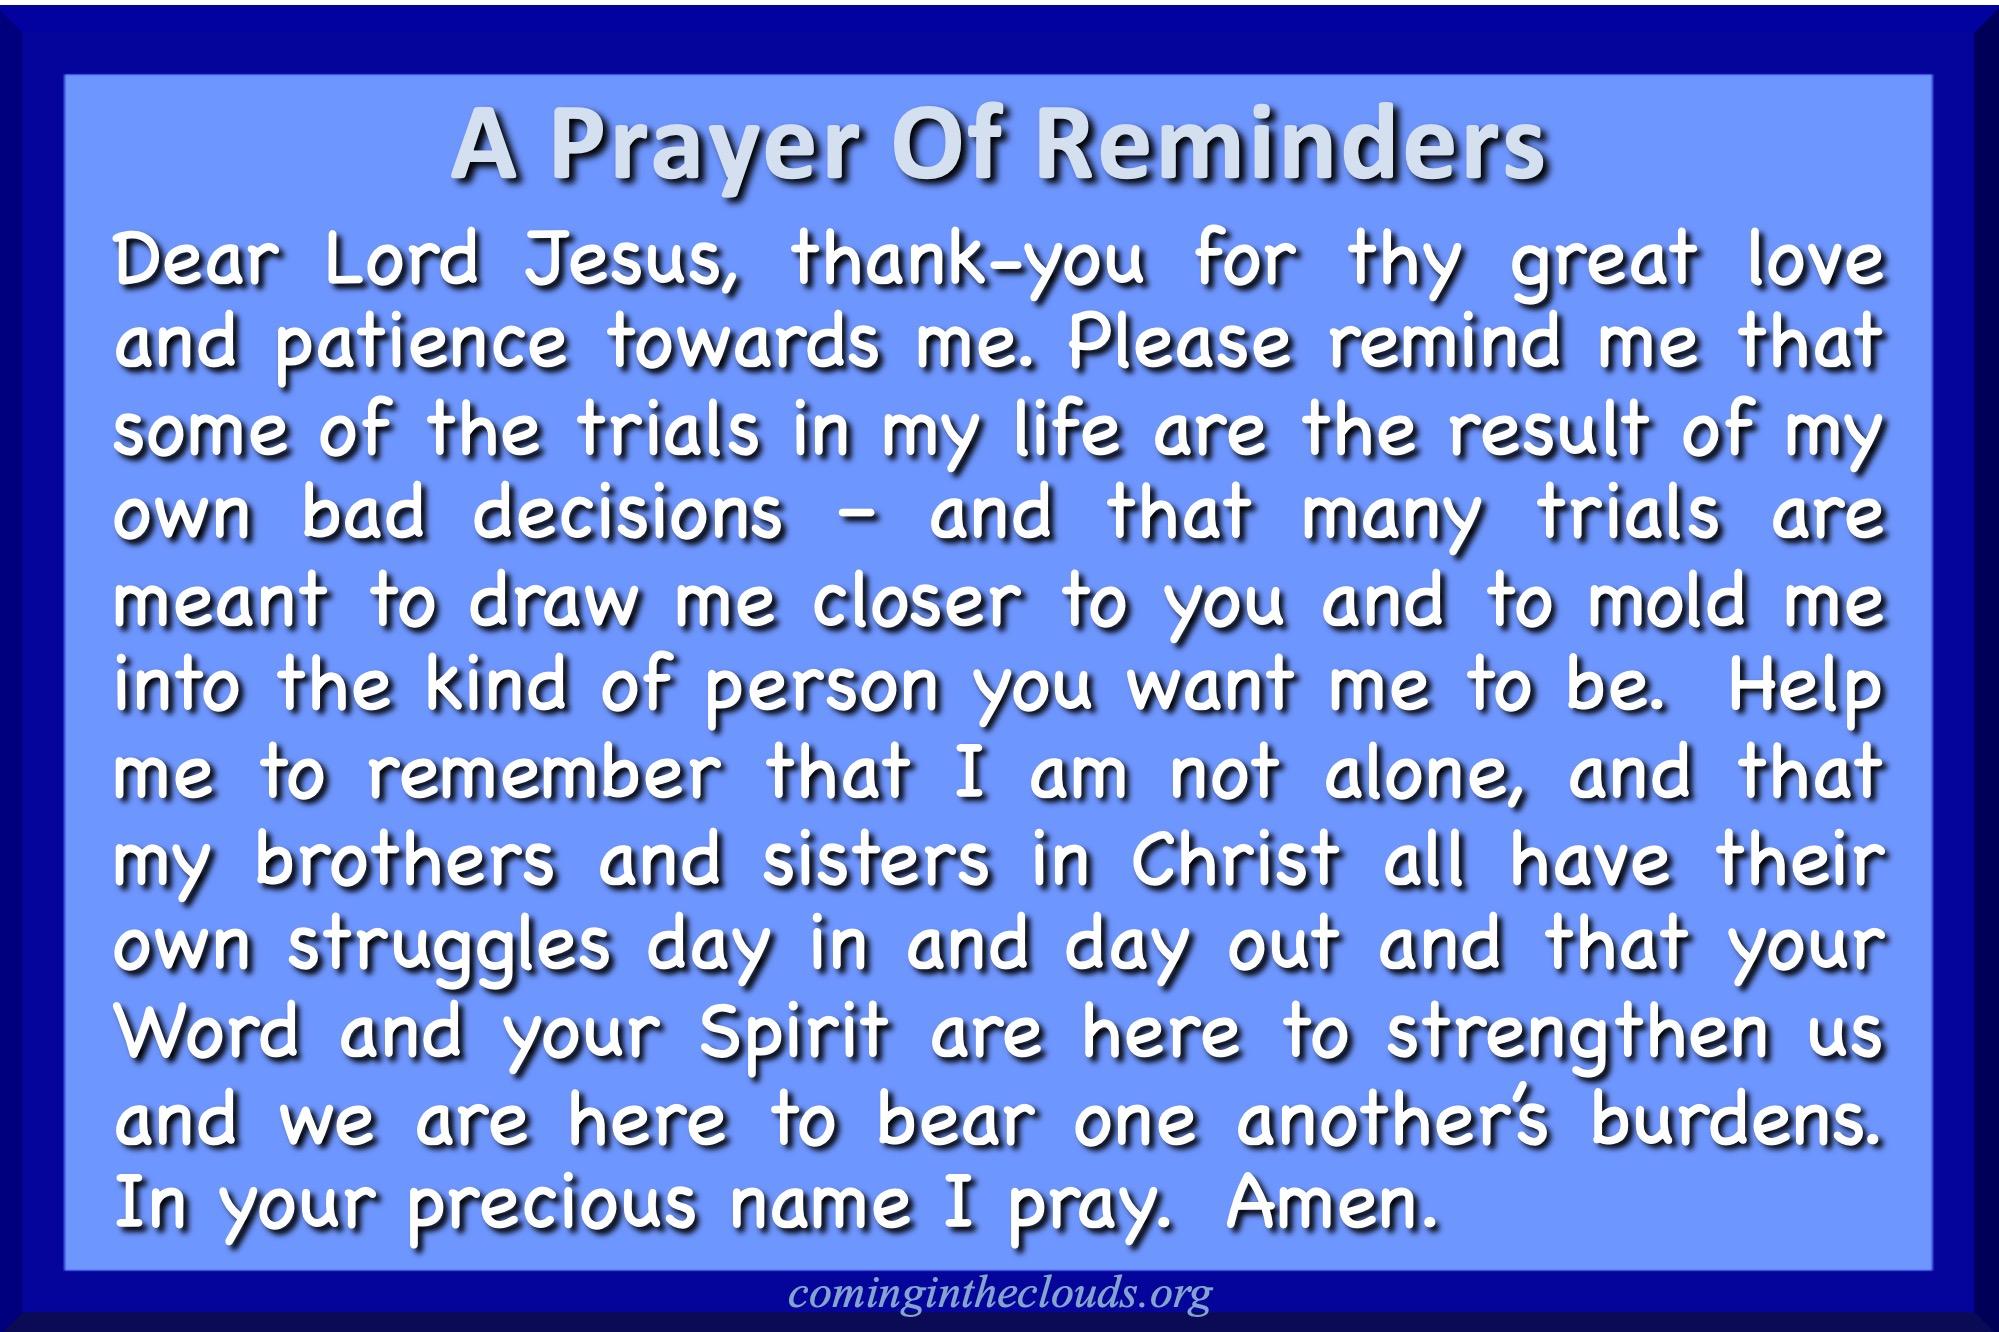 A prayer of reminders